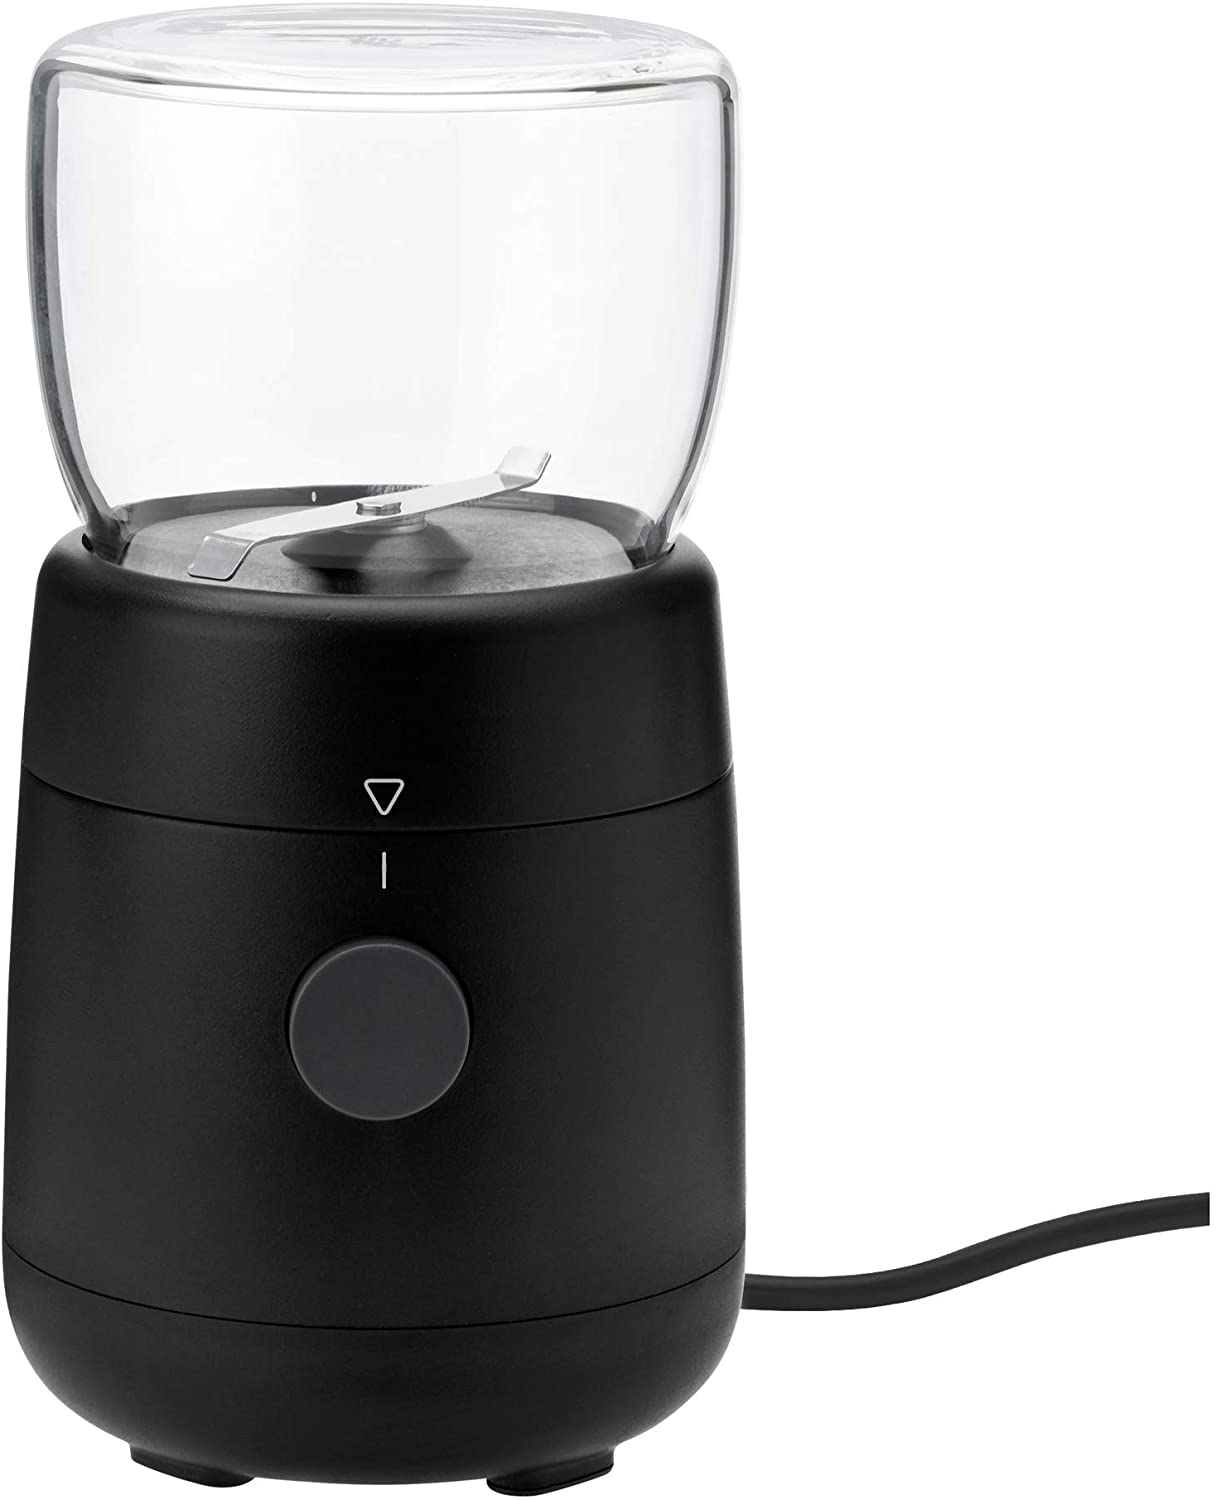 Stelton RIG-TIG FOODIE Coffee Grinder - Automatic Electric Blender, Crusher for Coffee Beans, Spices - One Button Operation - Glass, Borosilicate Plastic, Stainless Steel - Portable & Compact - Black